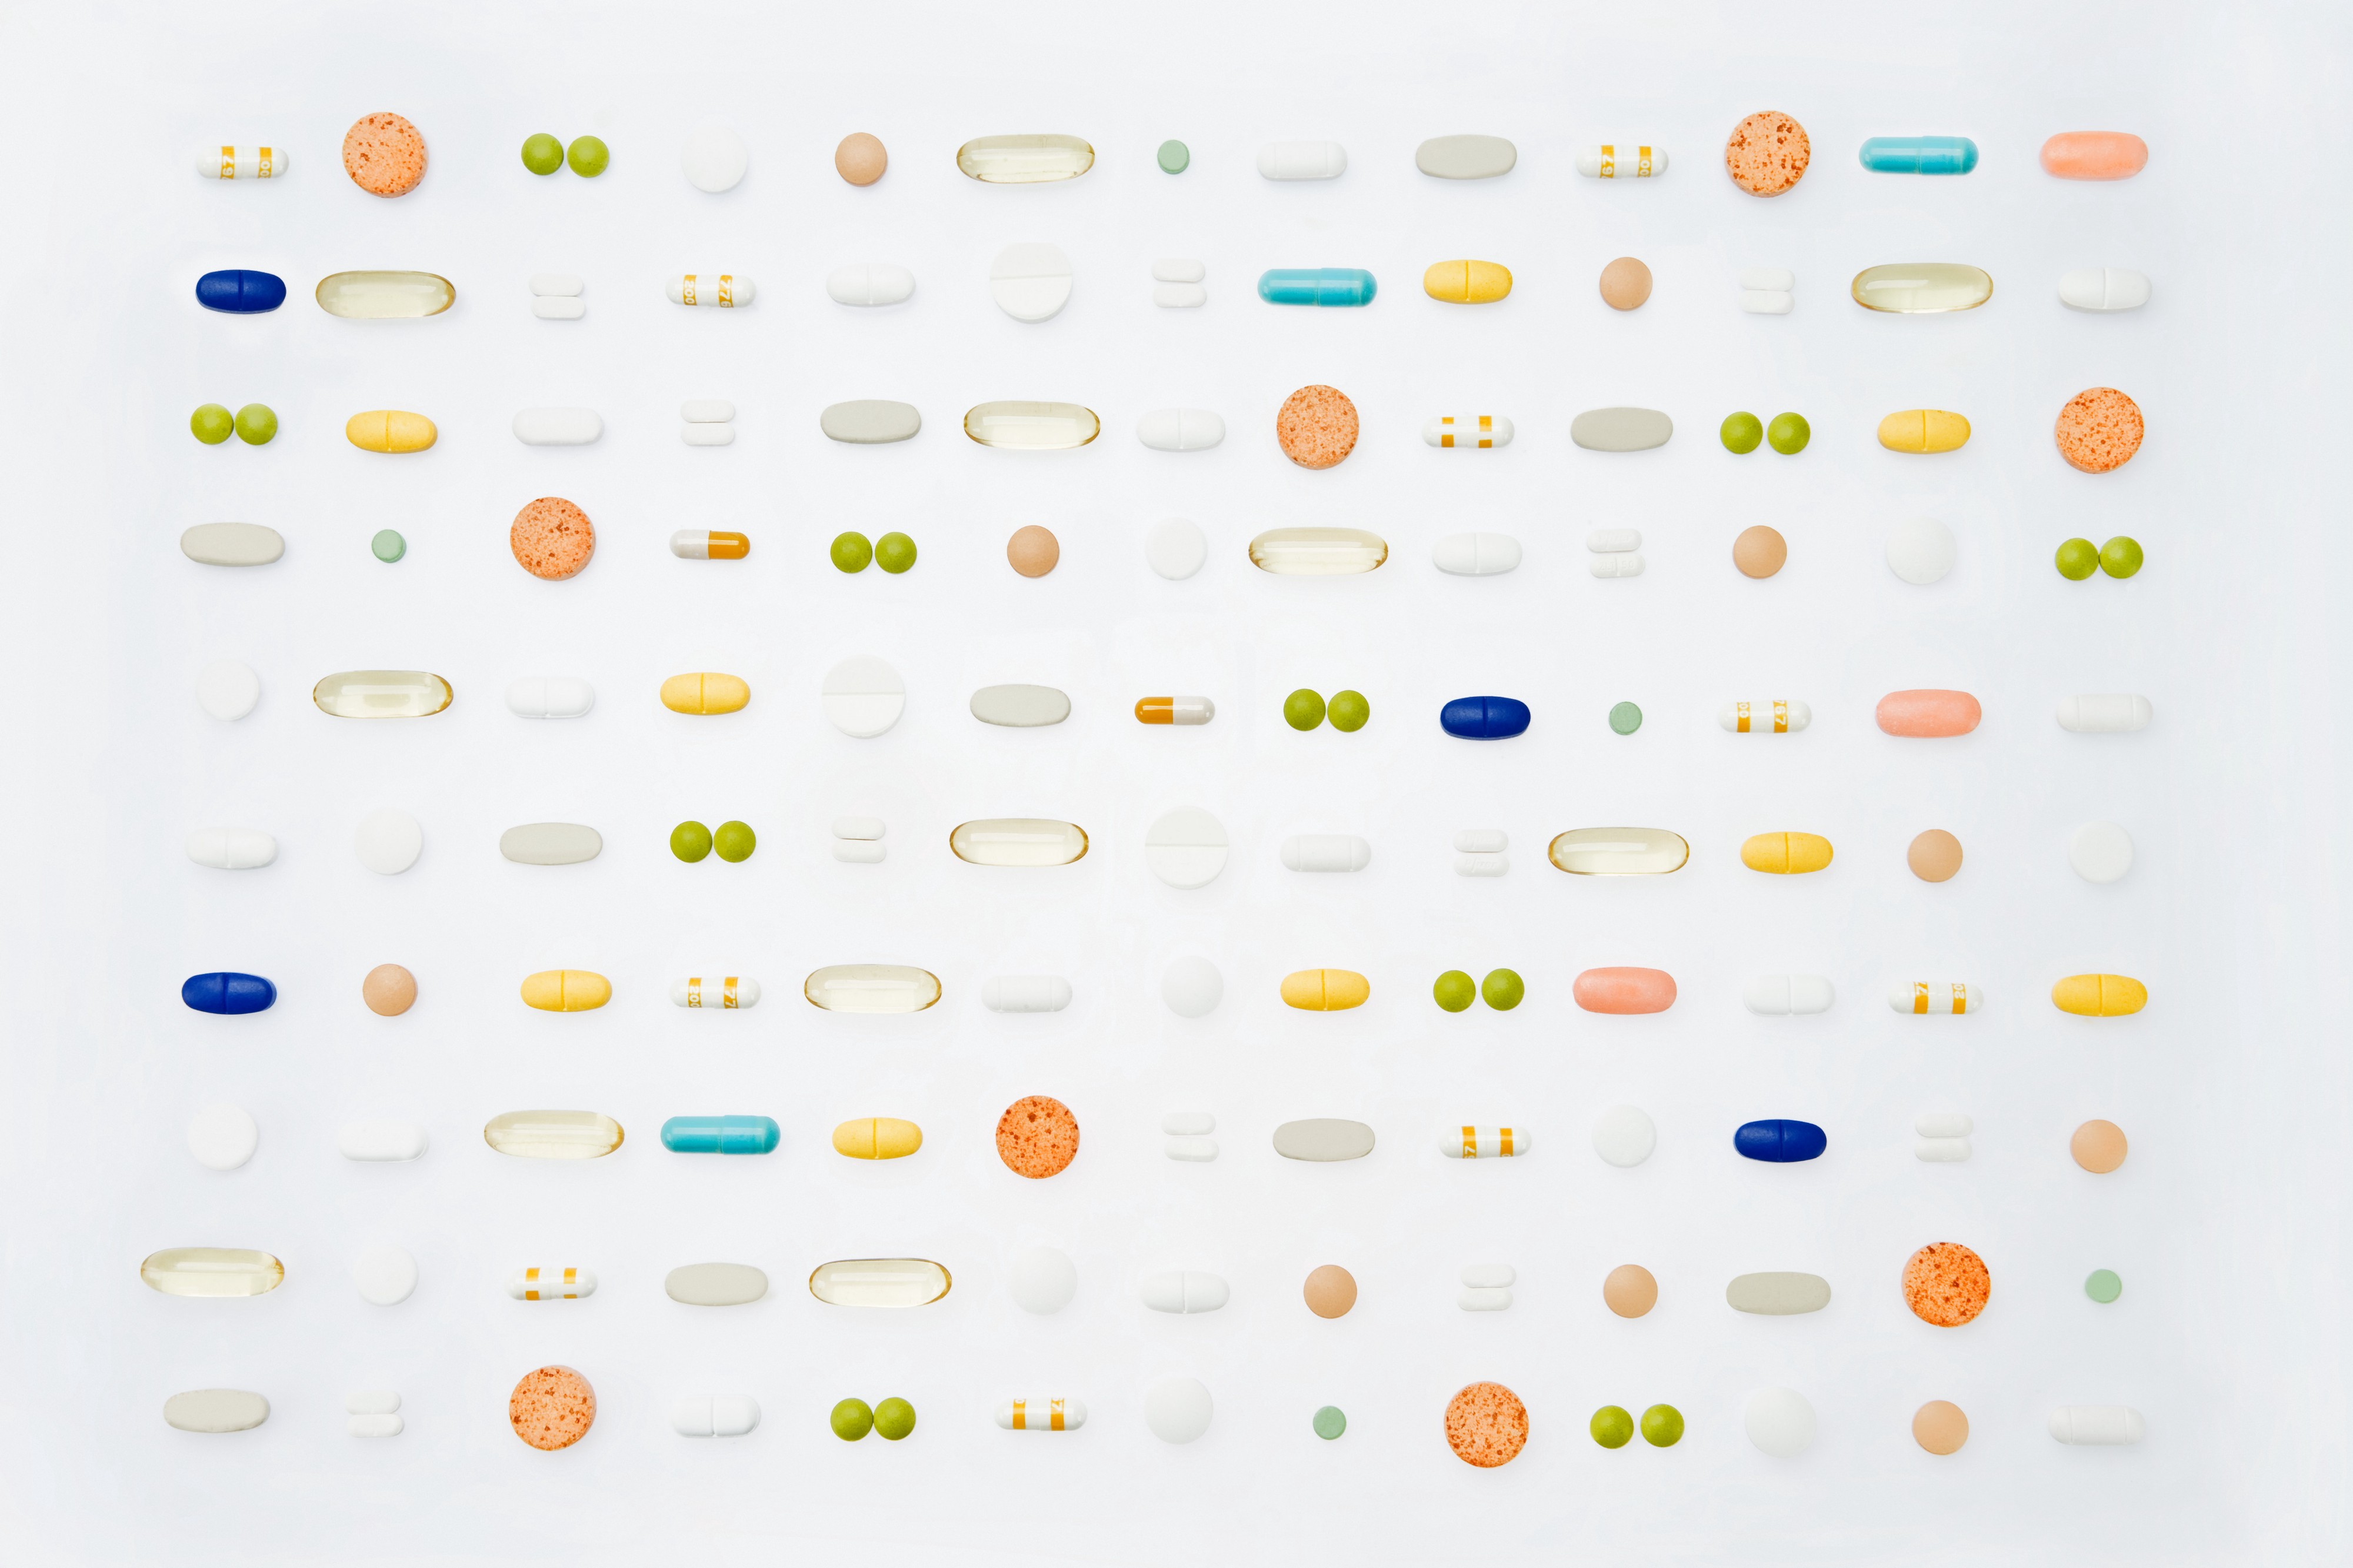 A variety of different pills and supplements are laid out in a grid against a white backdrop.